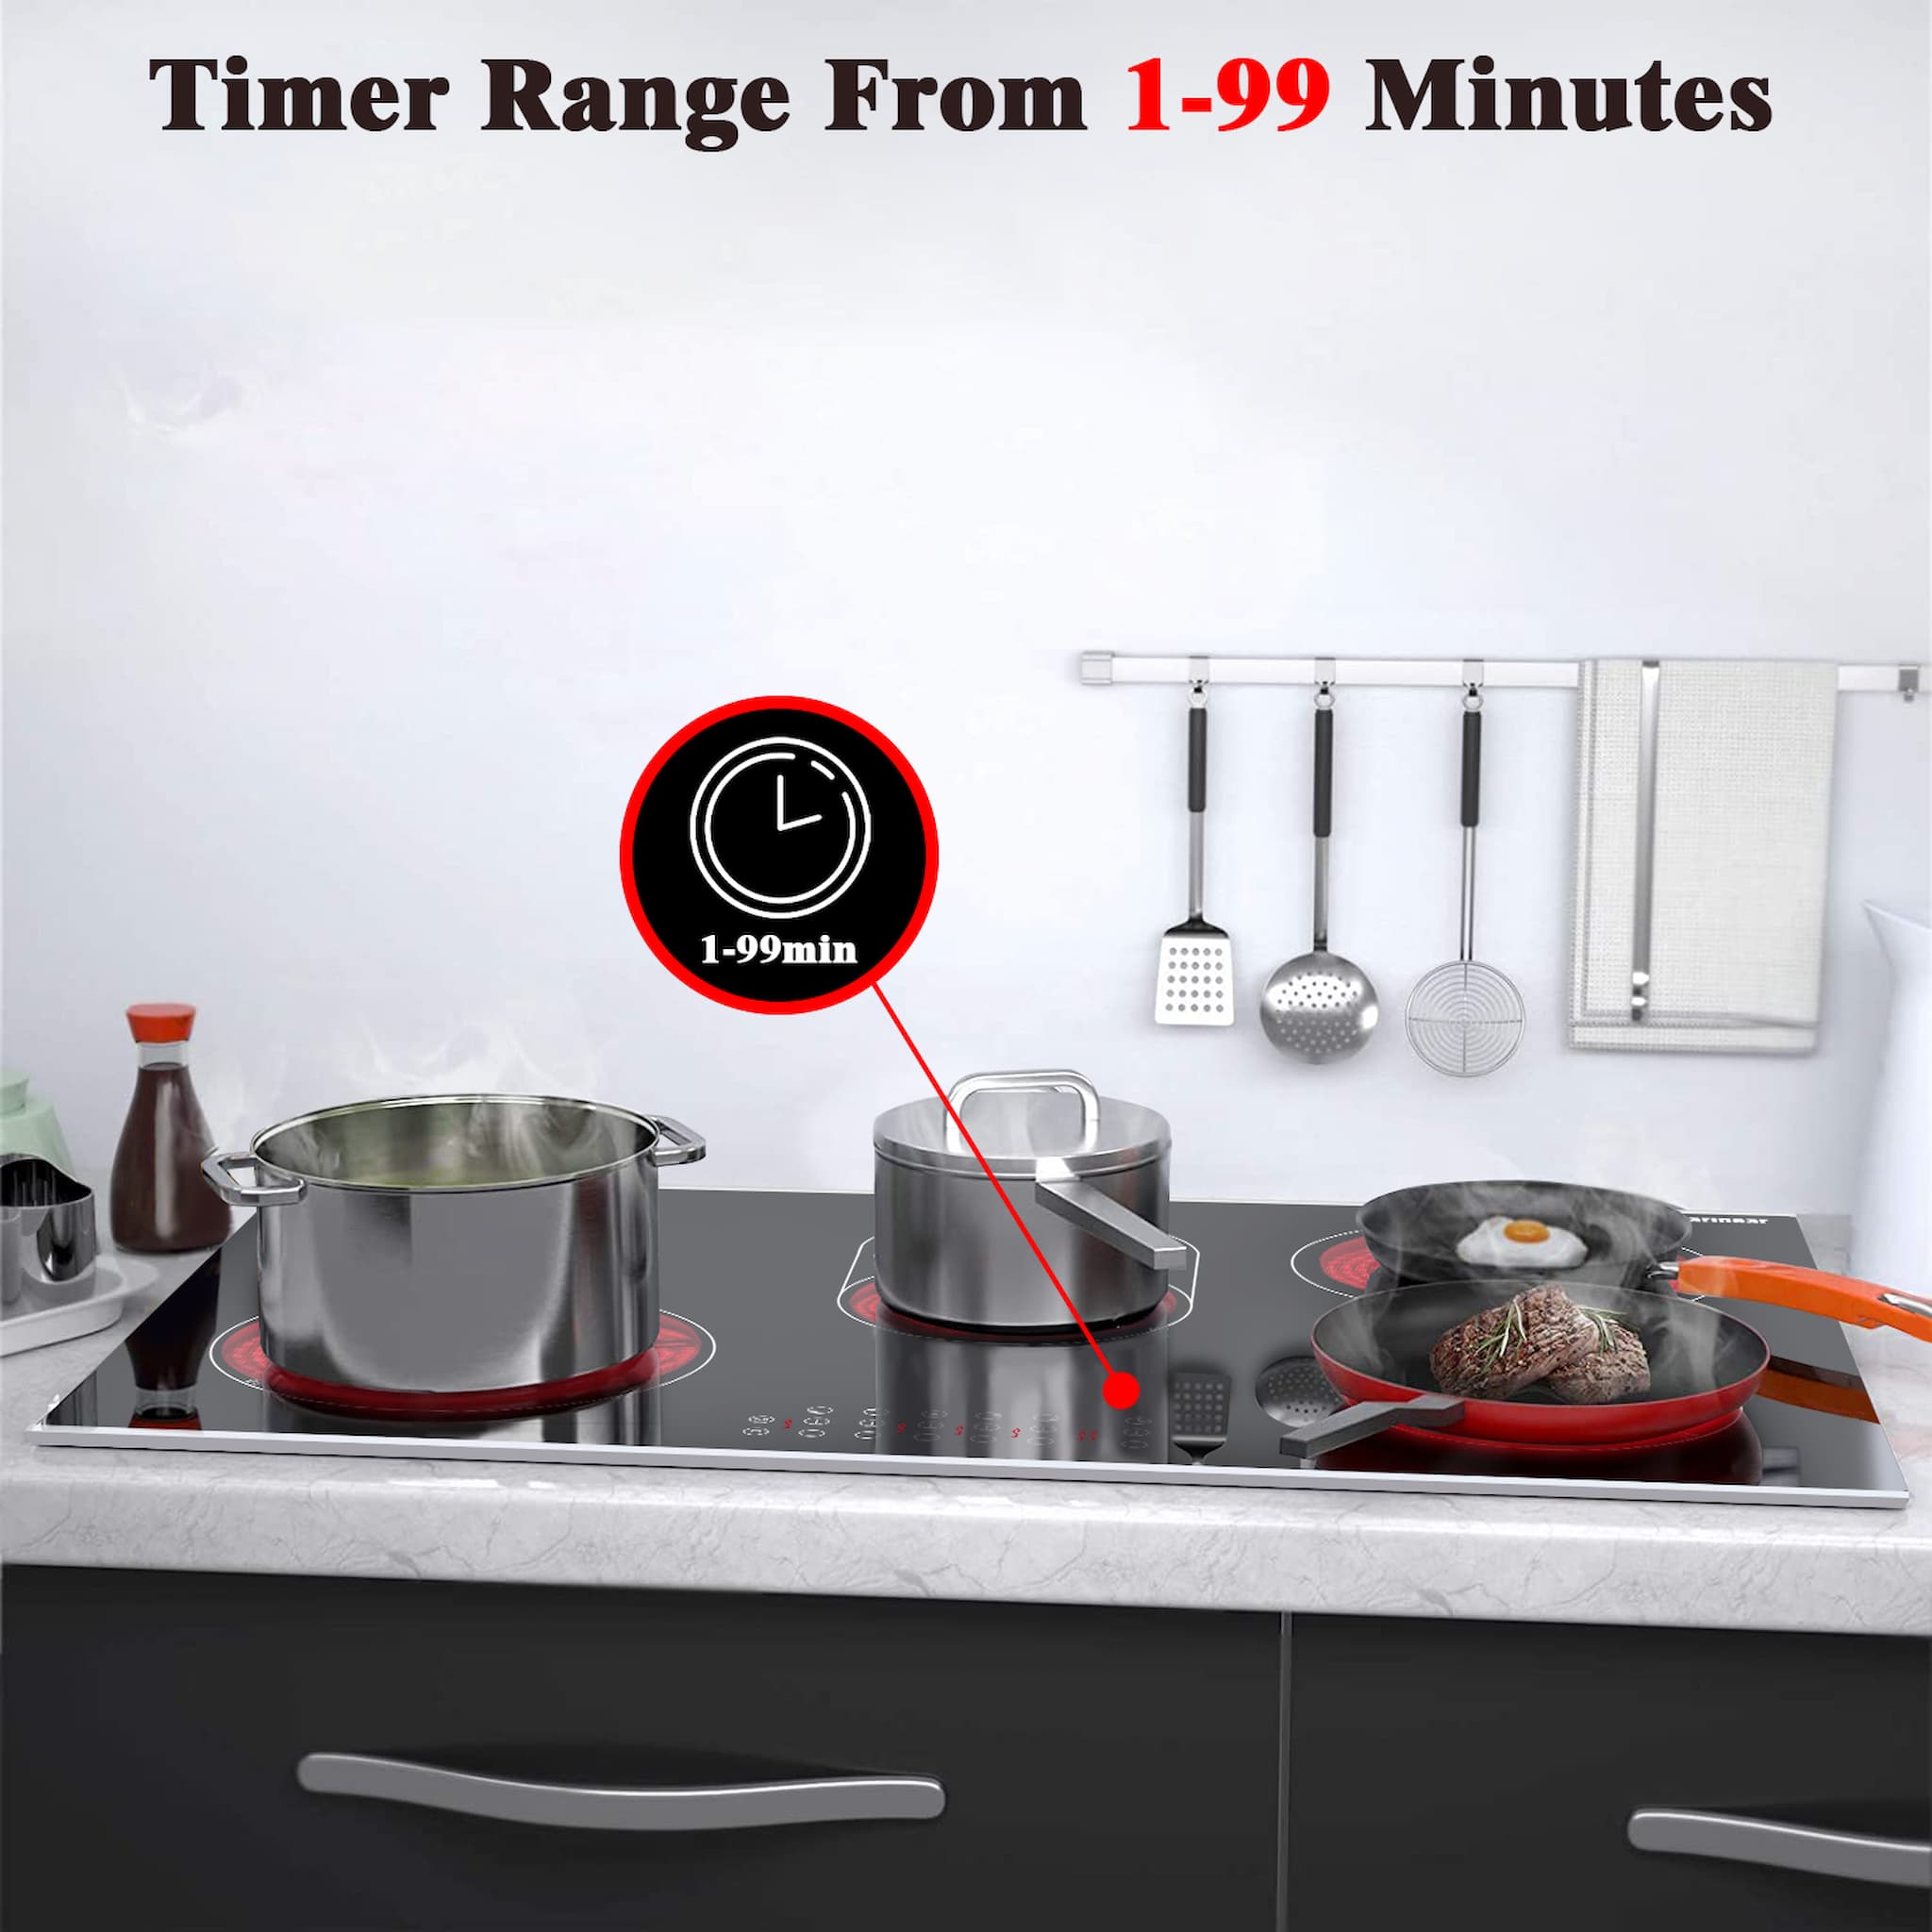 The 30 inch built-in radiant electric stove top is equipped with a 1-99 minute timer.